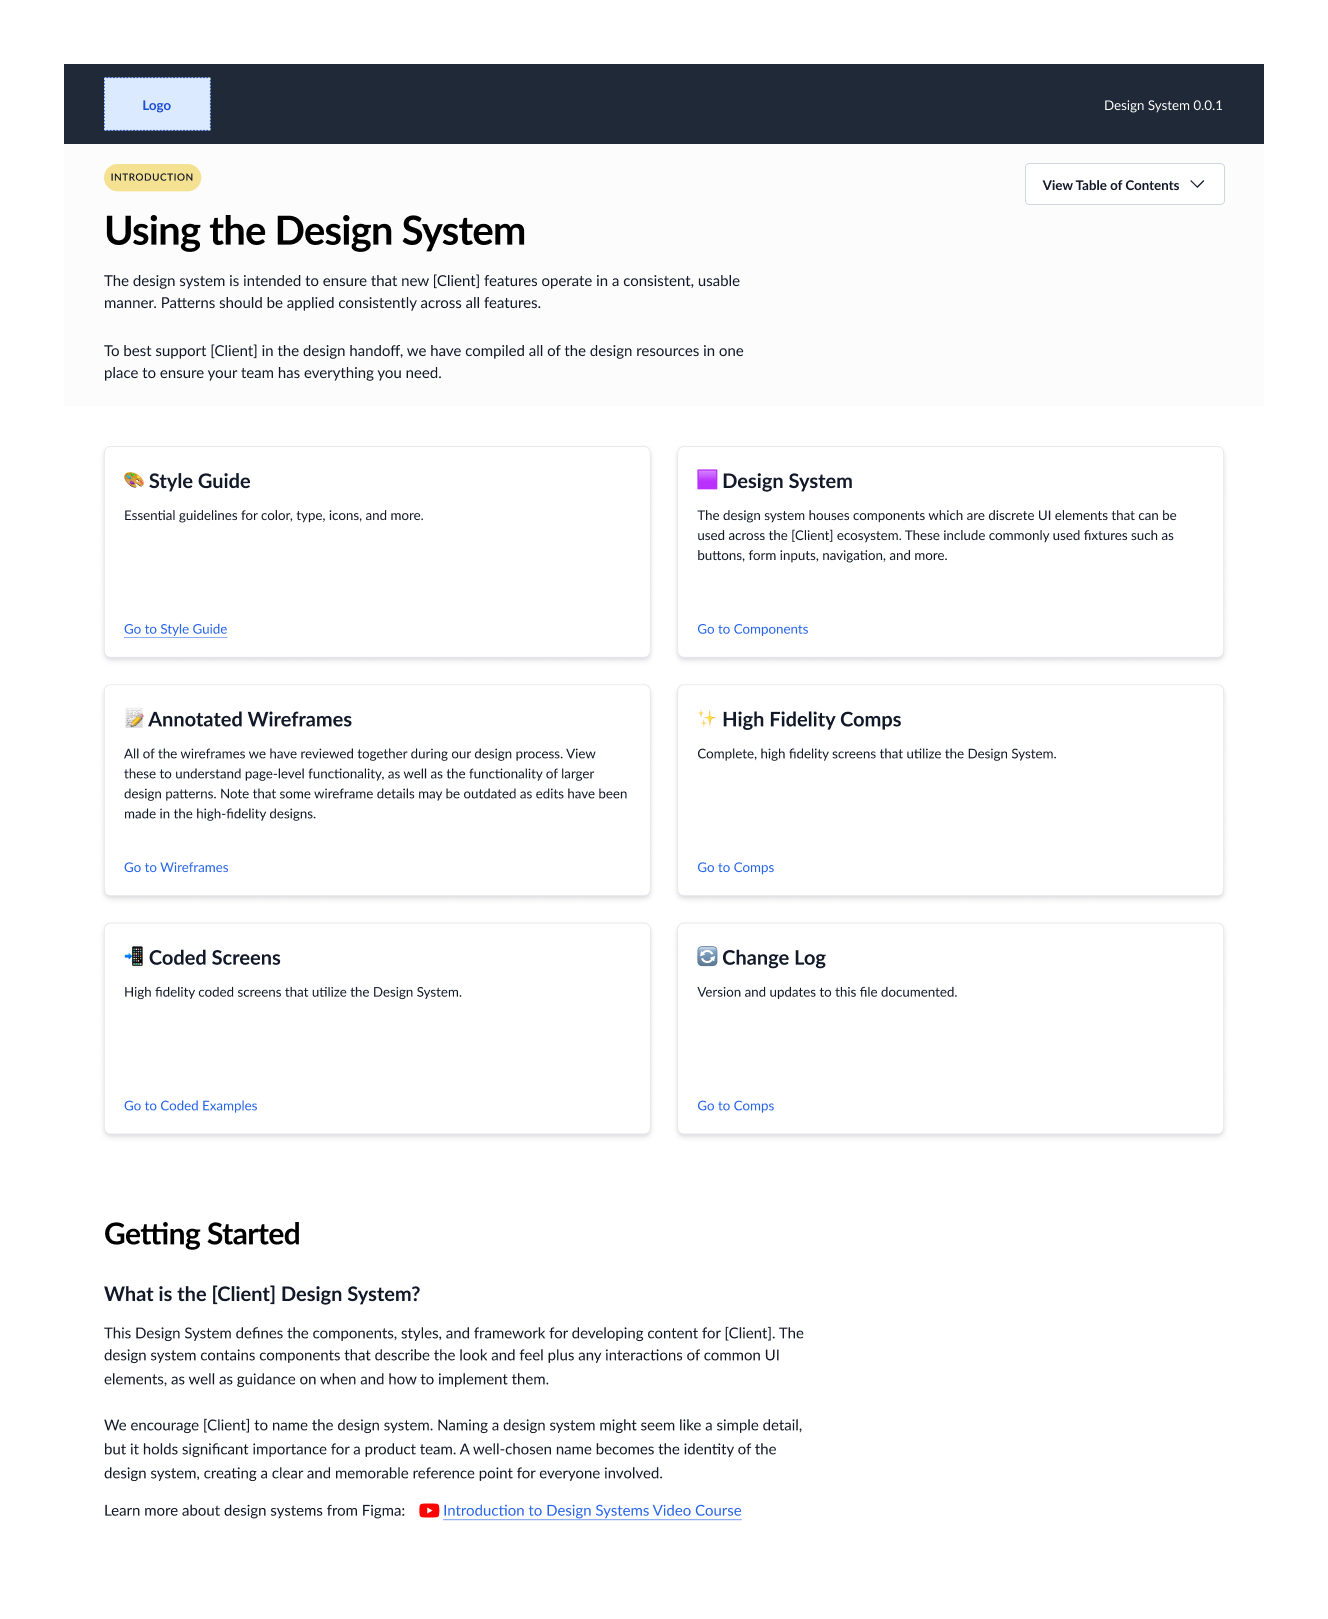 Screenshot of the [Client] Design System getting started page, titled "Using the Design System". The page shows a list of the different components and assets in the design system, as well as instructions on how to use them.